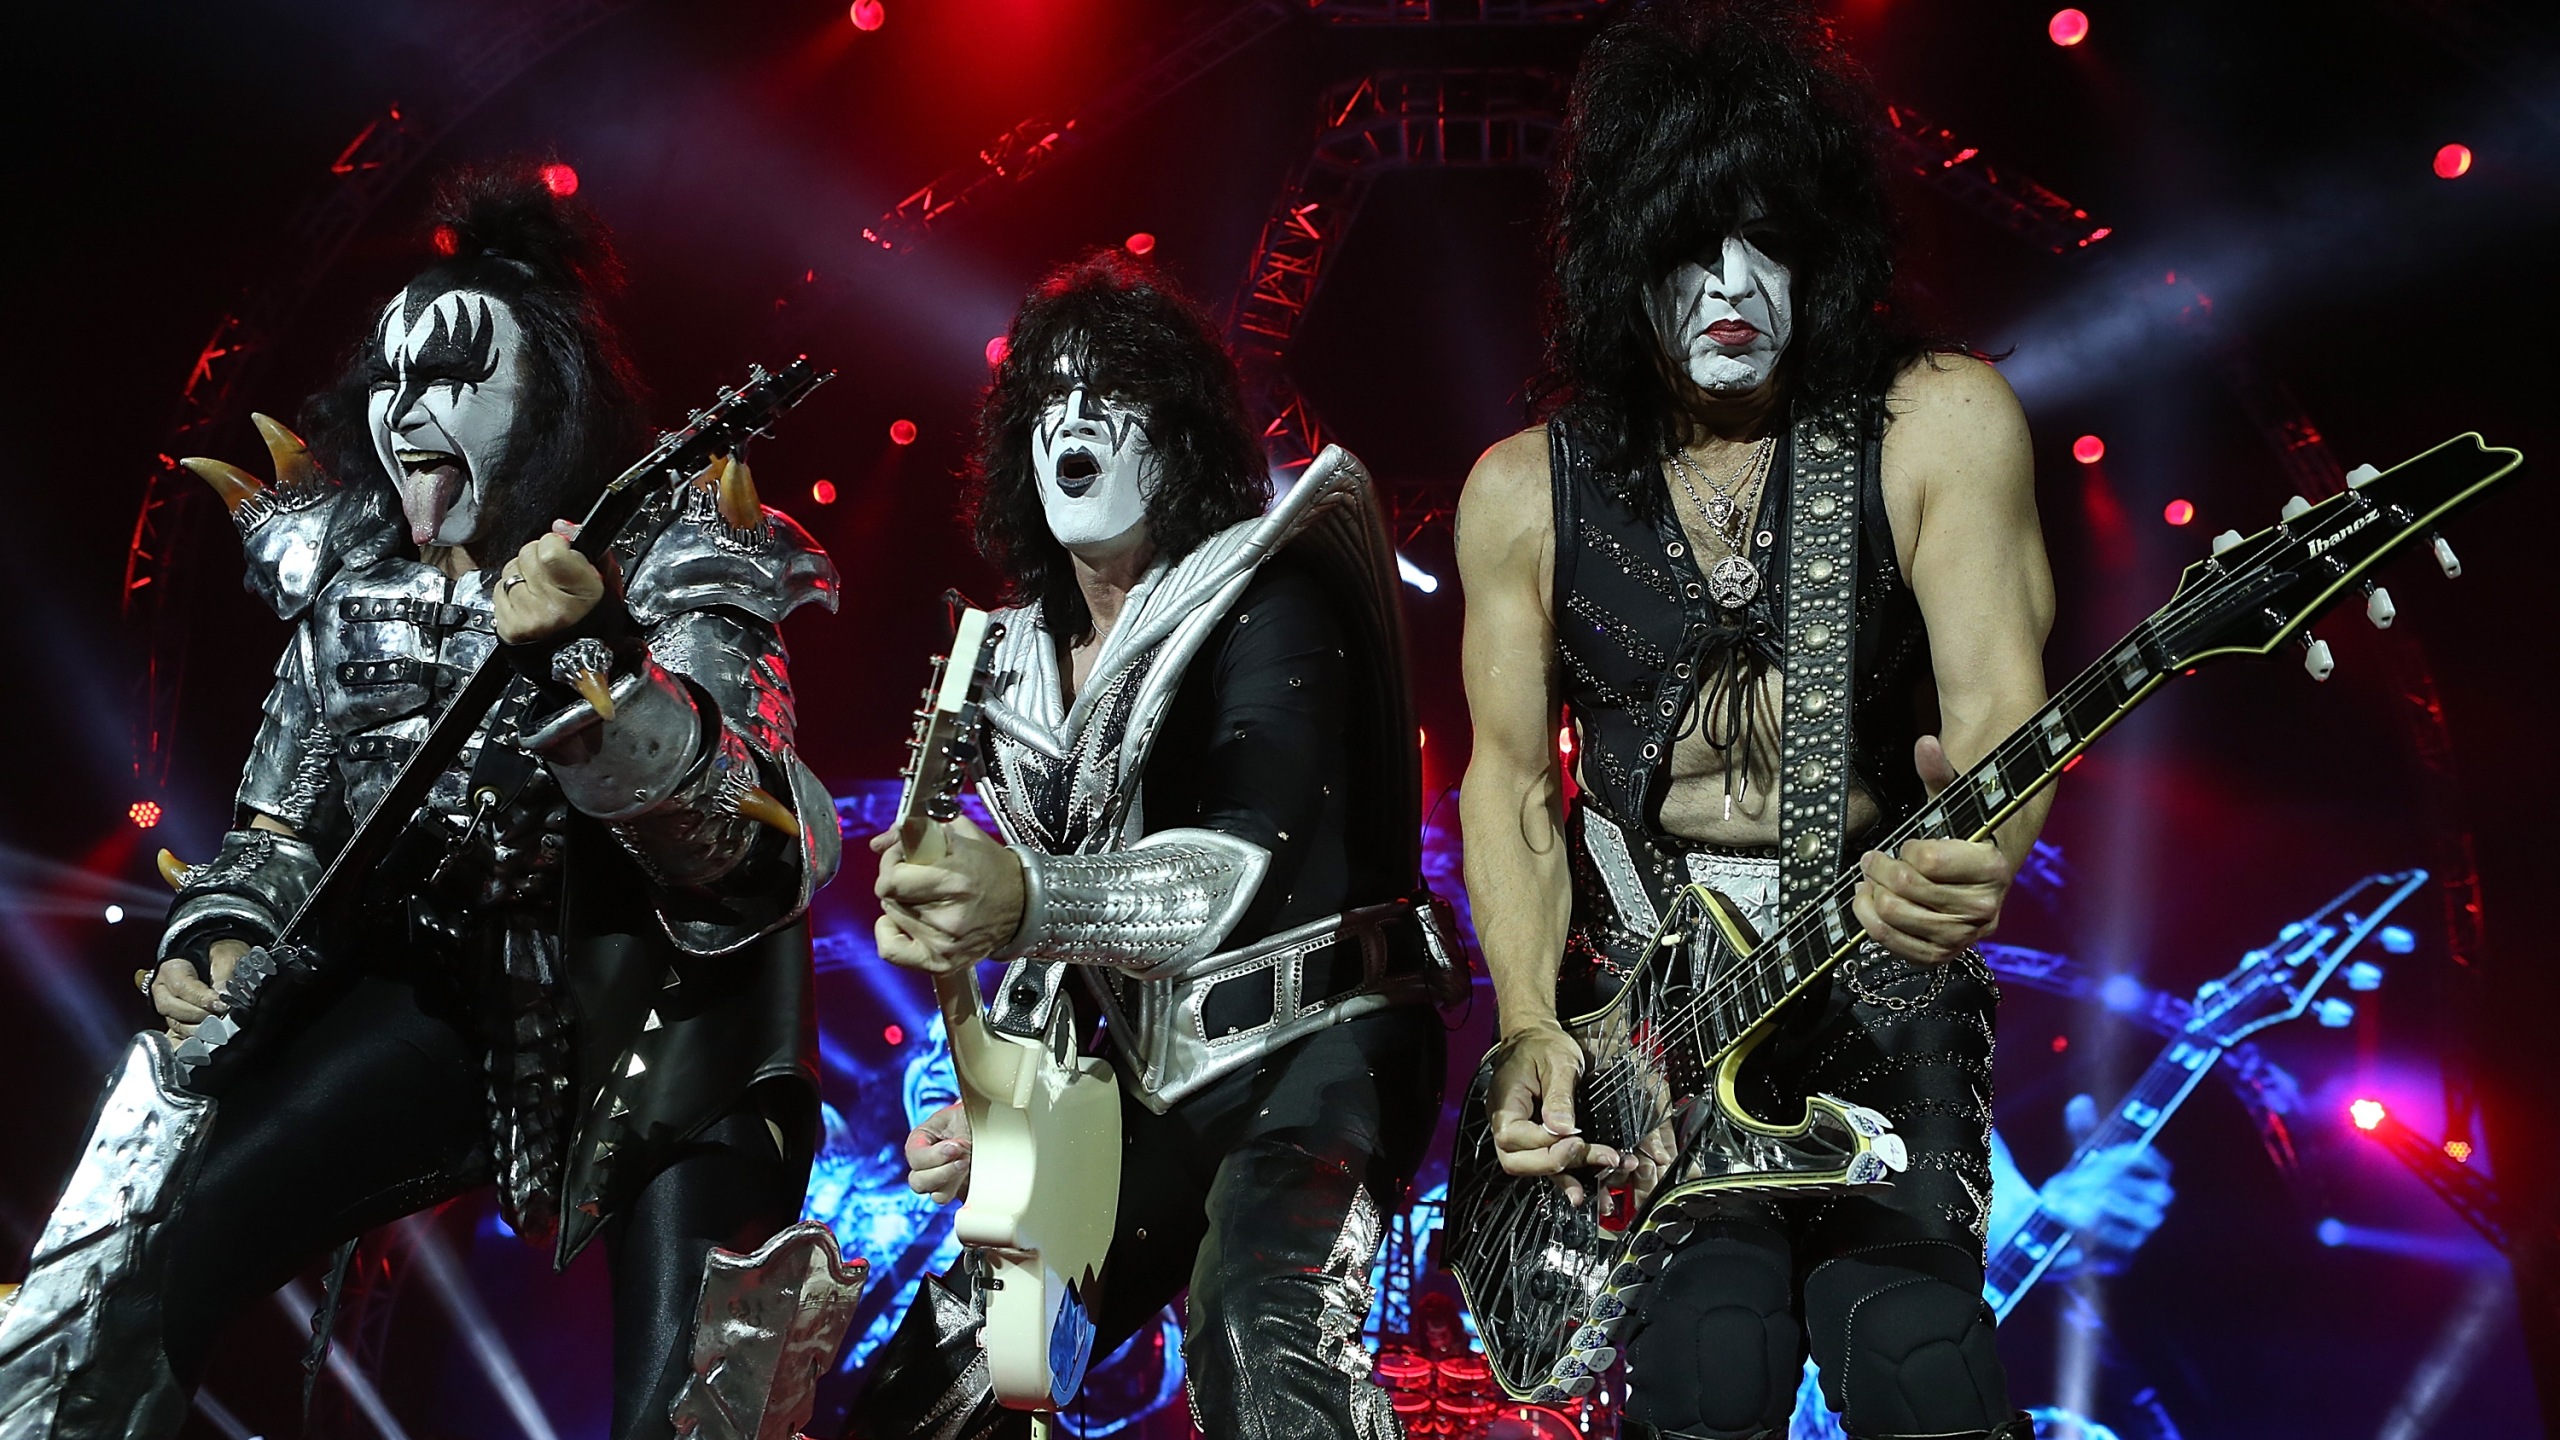 Iconic rock band KISS bringing farewell tour to central Indiana in August 2019